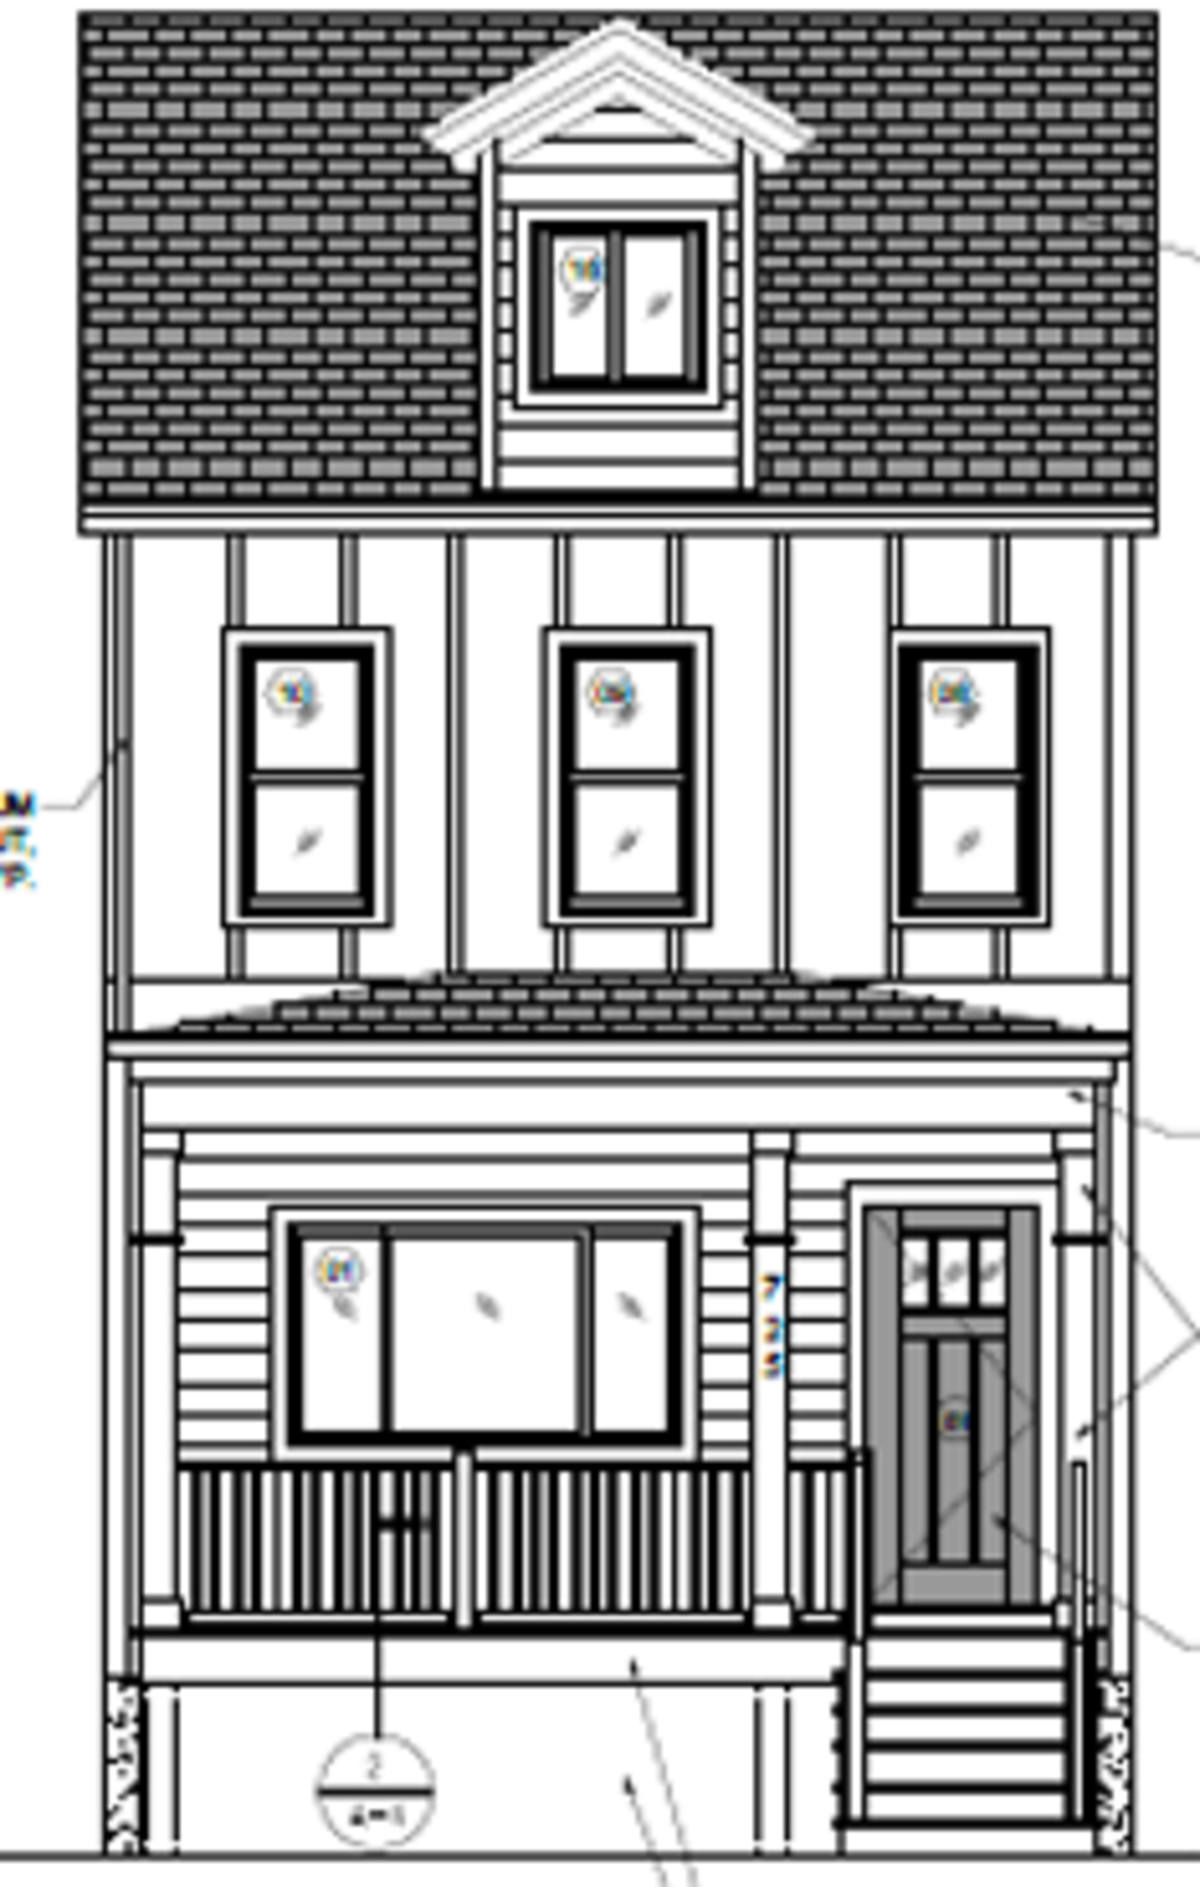 725 Excelsior Street facade drawing- property is coming soon